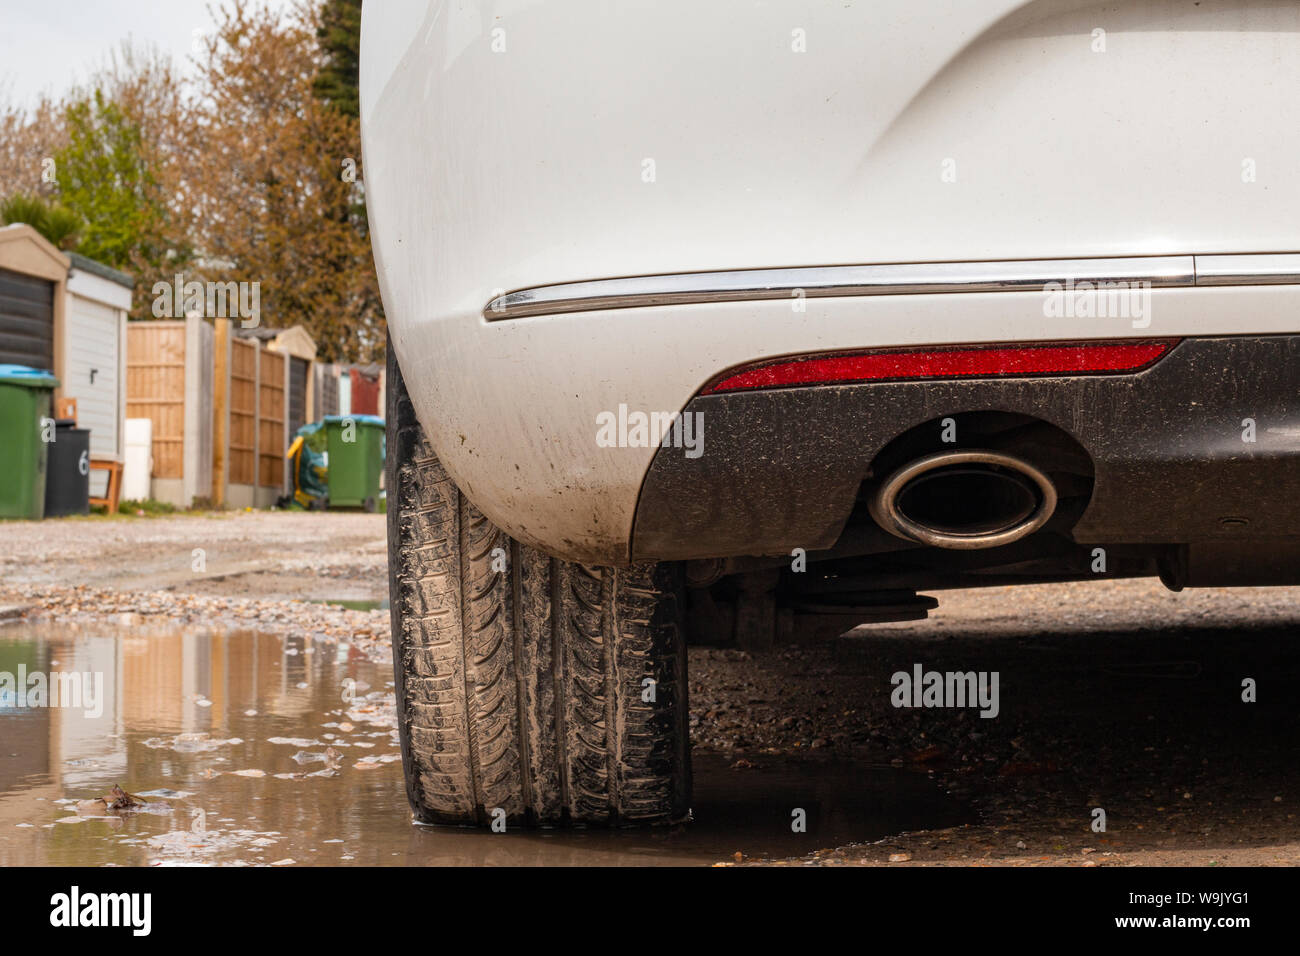 Close up of the rear of a Vauxhall Astra car on a wet driveway in the UK Stock Photo